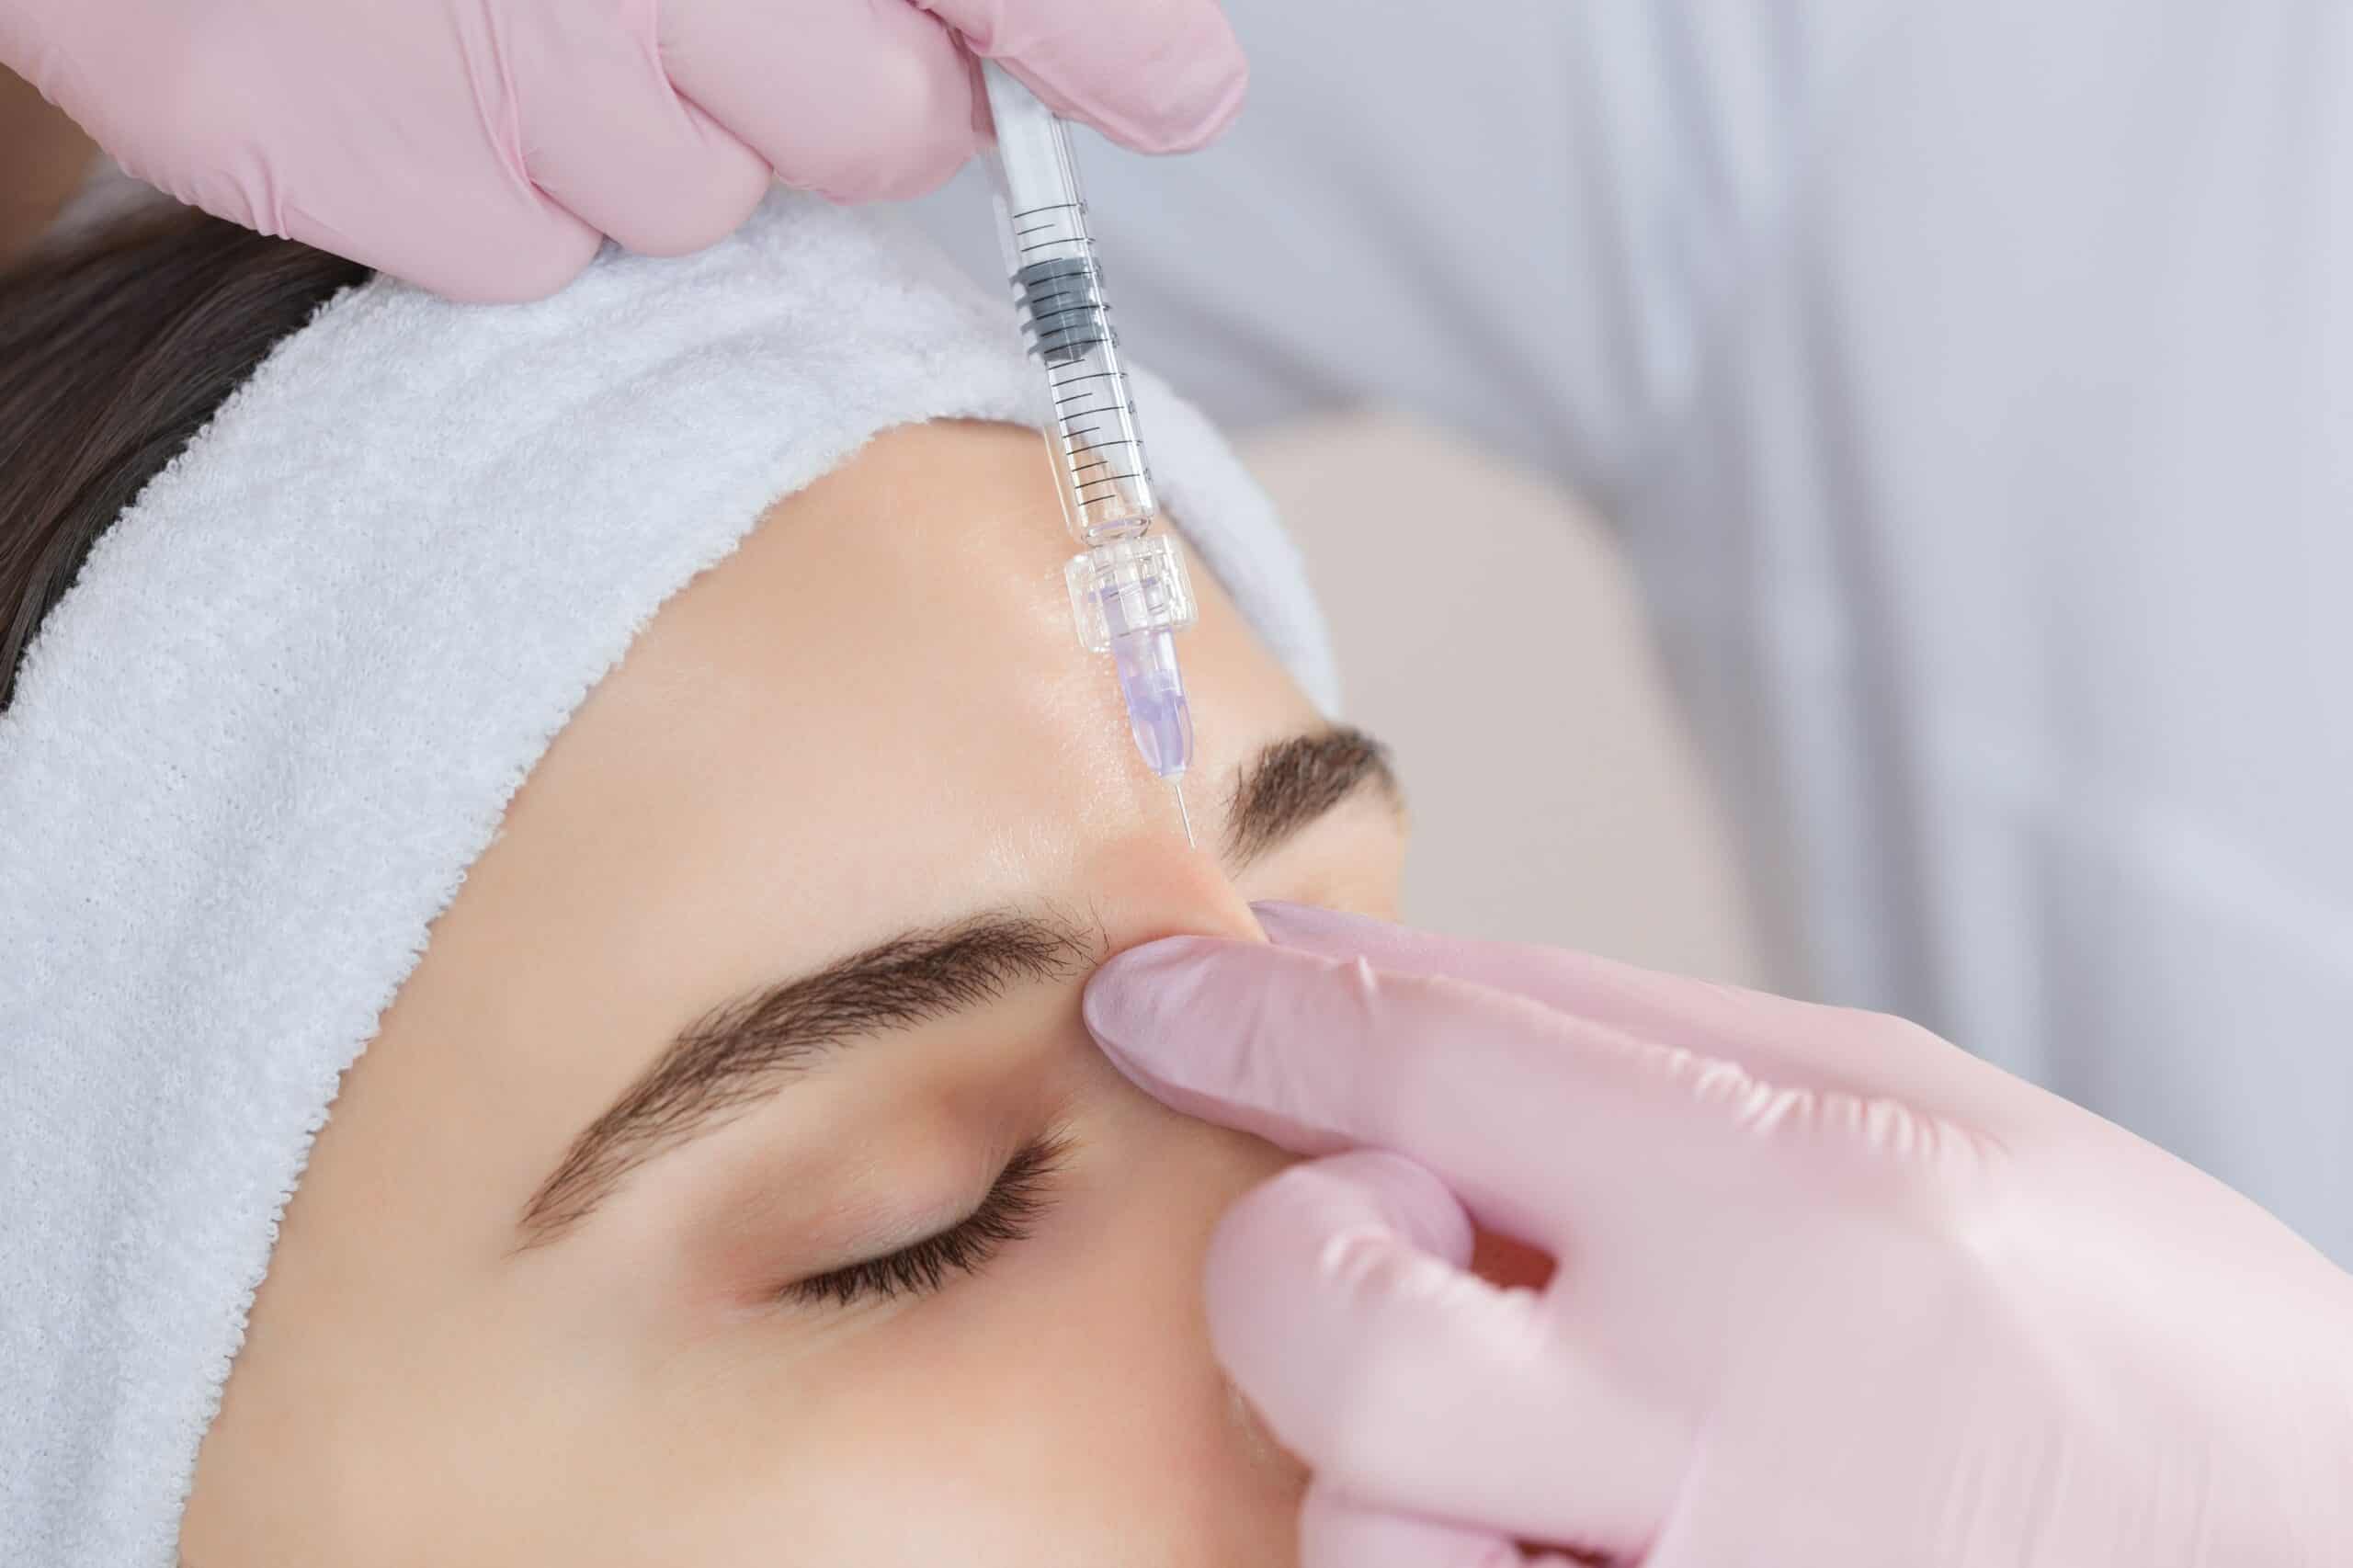 What Are The Cons of Dermal Fillers